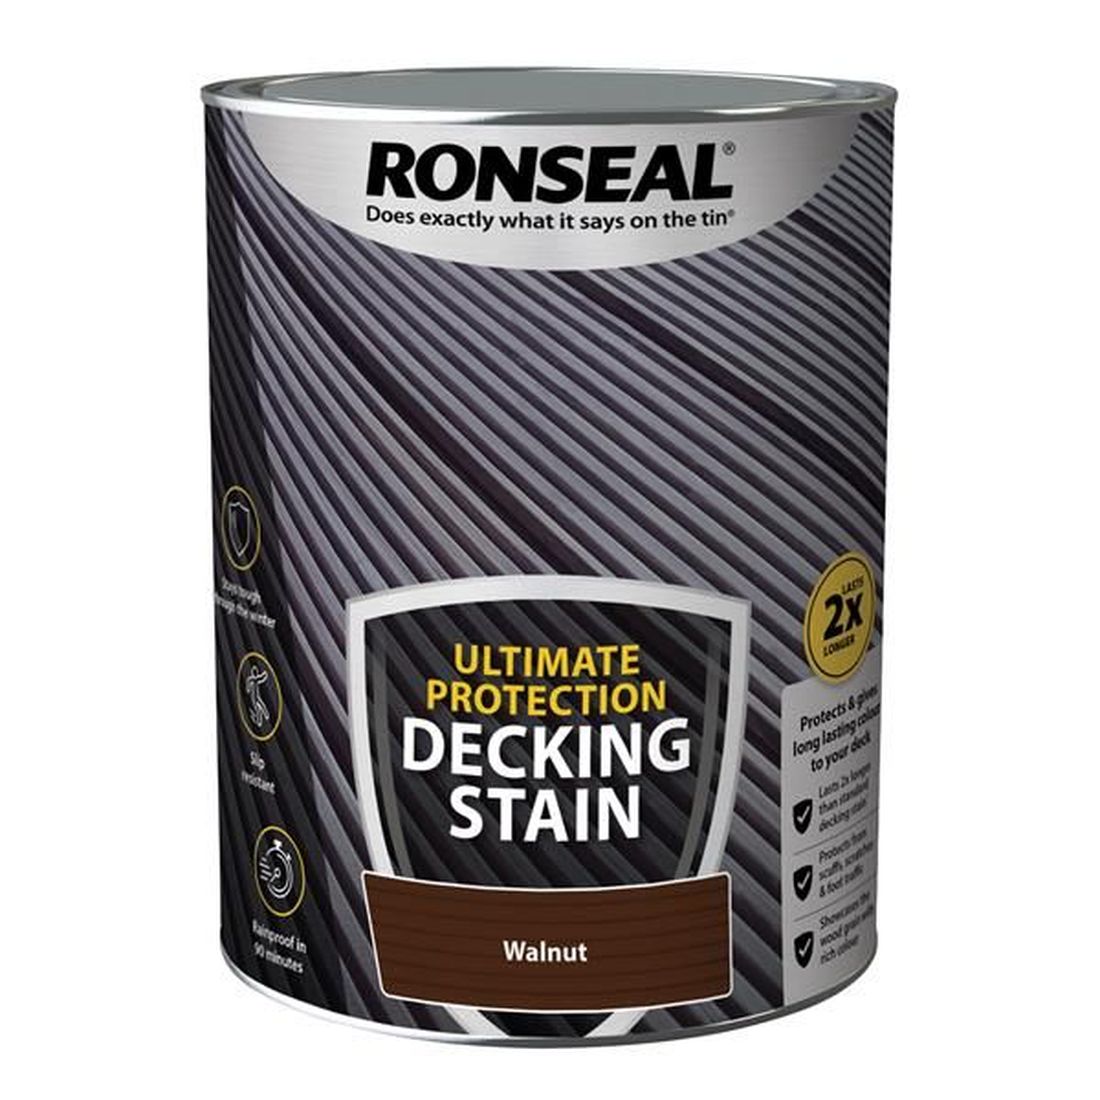 Ronseal Ultimate Protection Decking Stain Walnut 5 litre                                